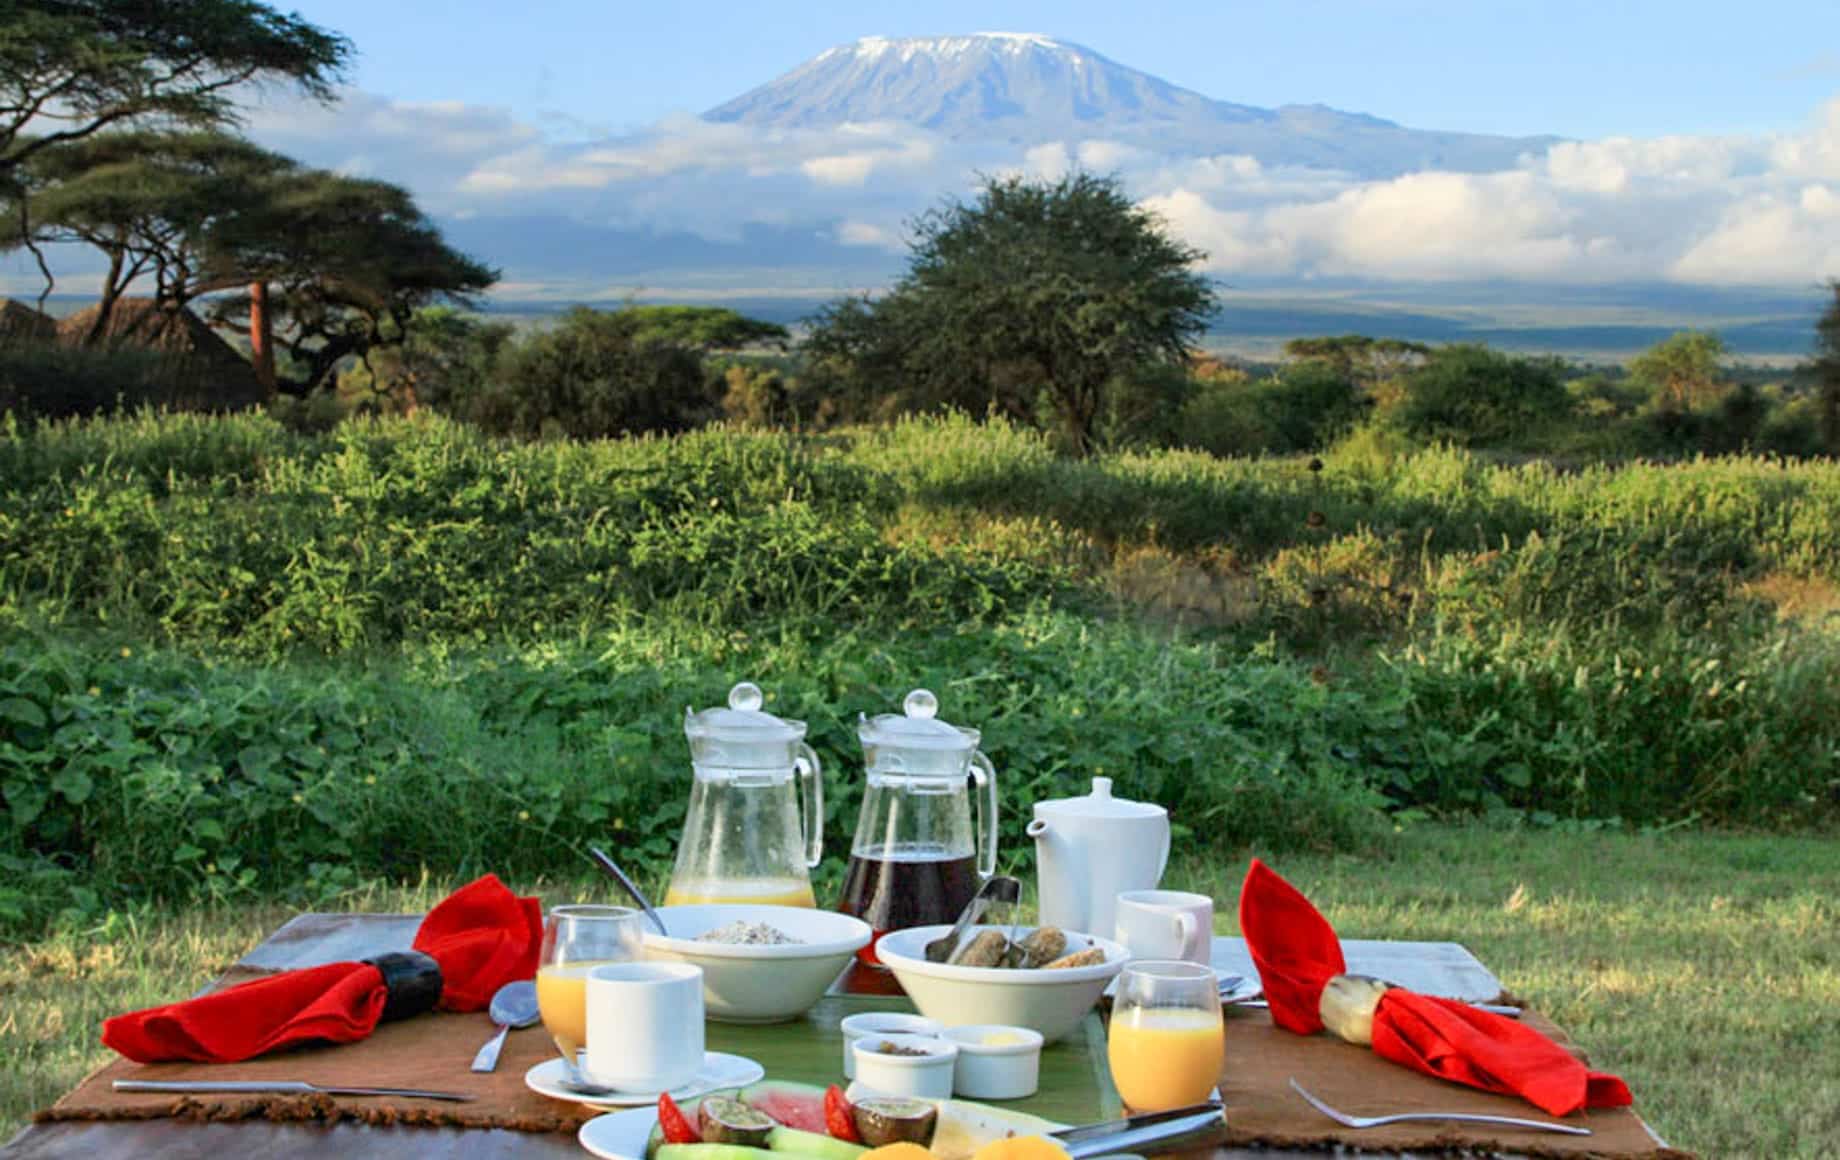 Kilimanjaro breakfast with a view